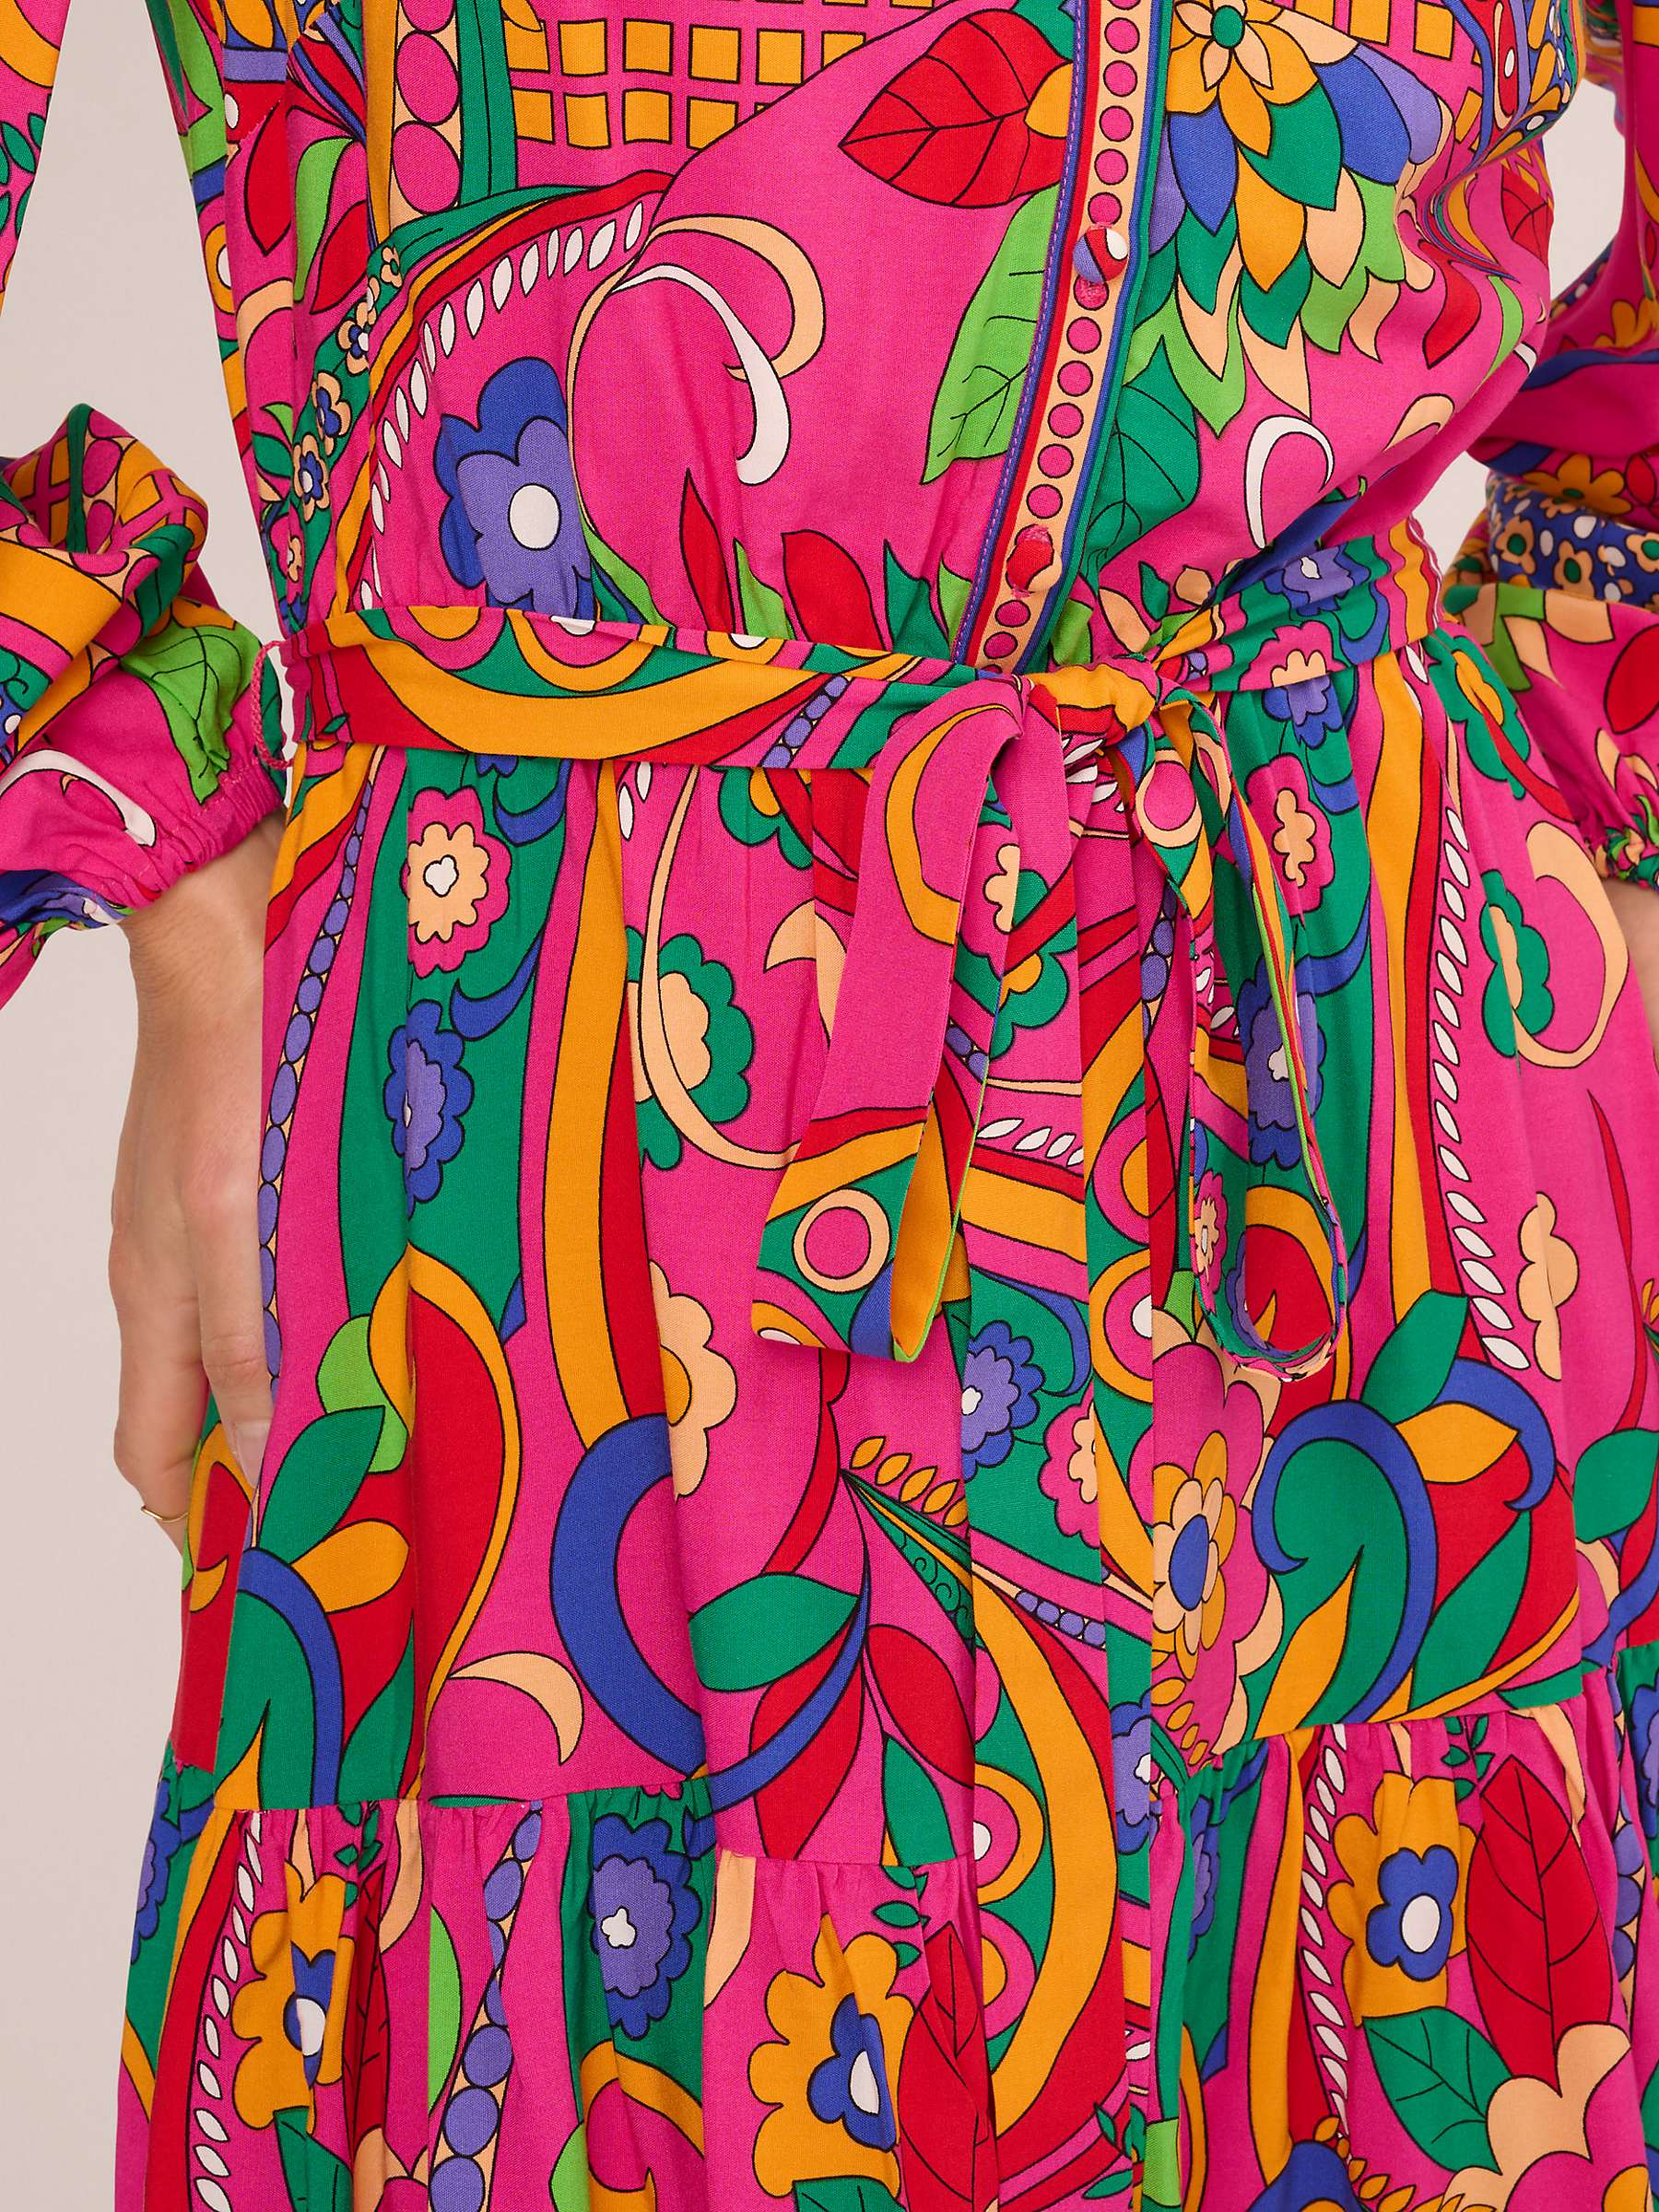 Buy Adrianna by Adrianna Papell Retro Abstract Print Mini Dress, Pink/Multi Online at johnlewis.com